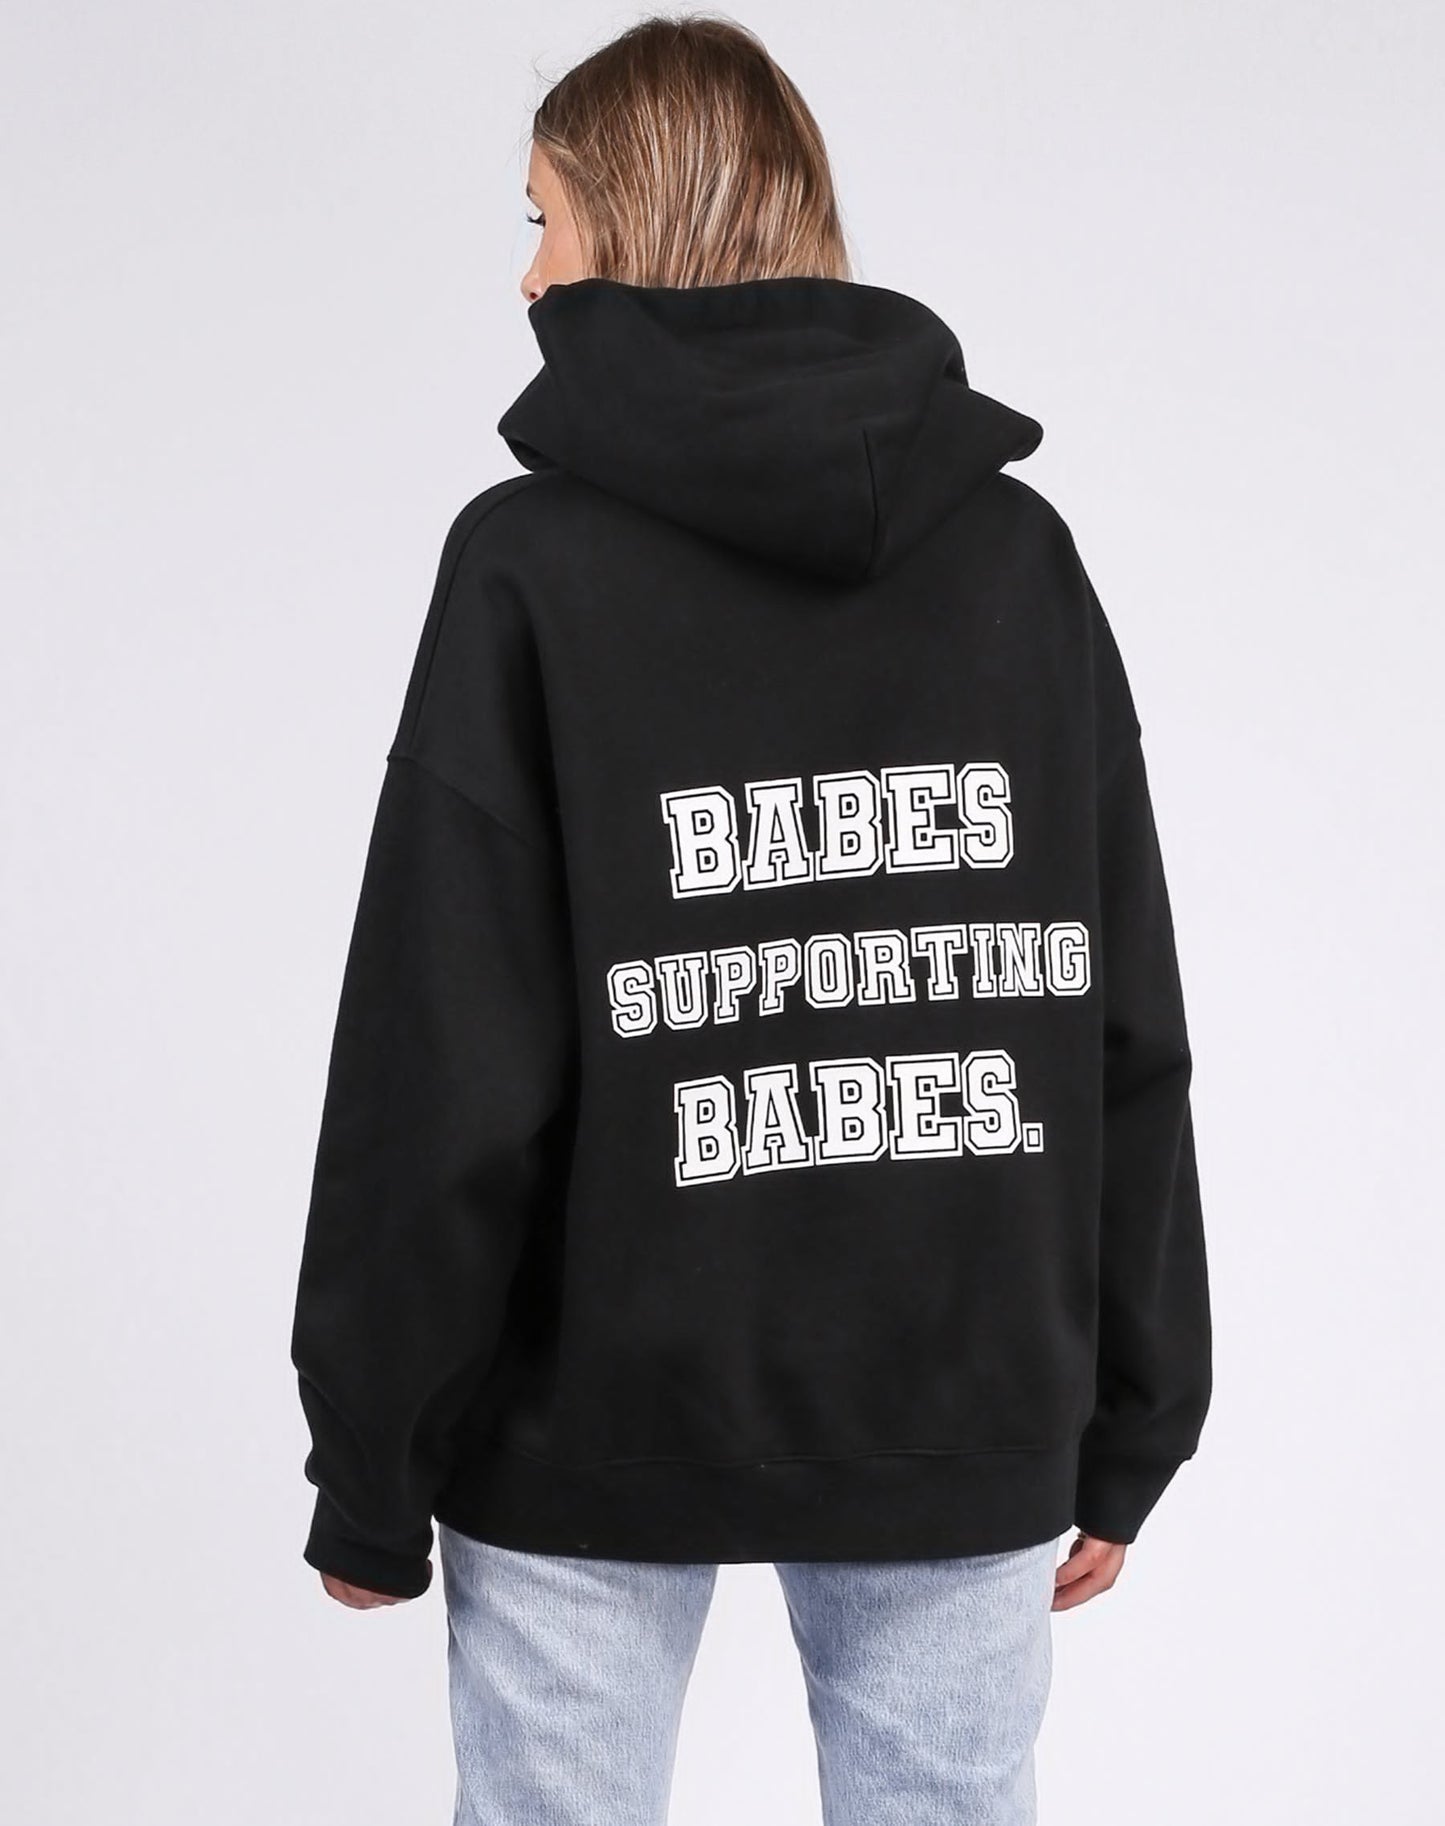 The "BABES SUPPORTING BABES" Big Sister Hoodie